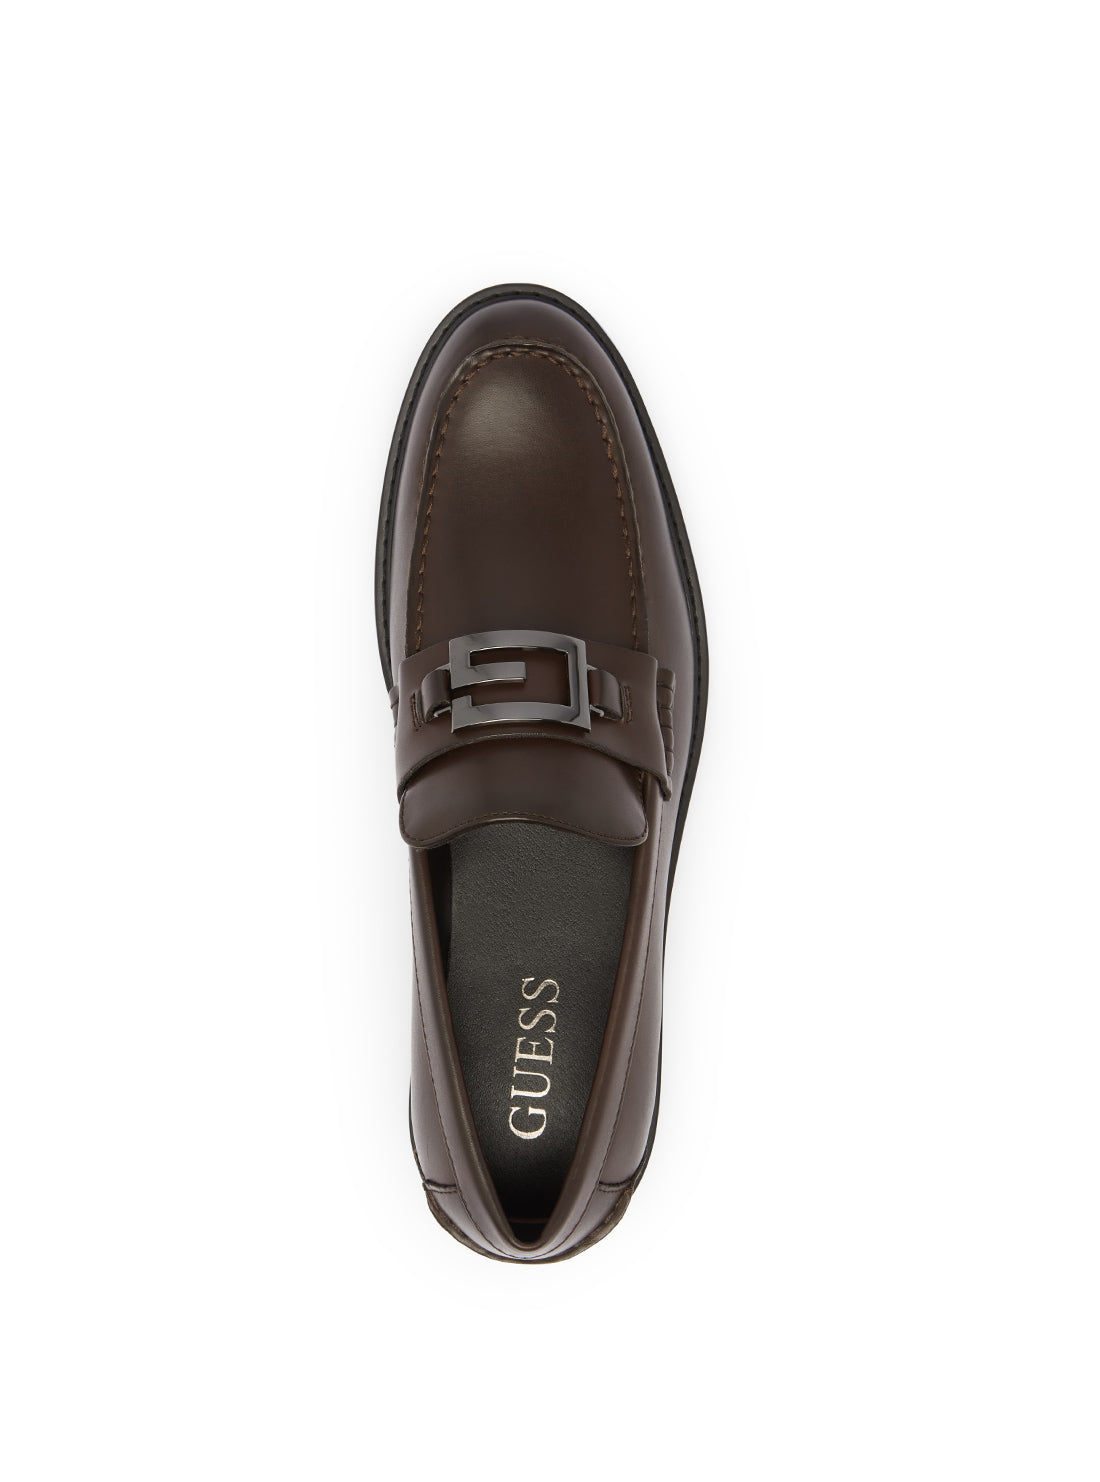 GUESS Brown Dremmer Loafers top view